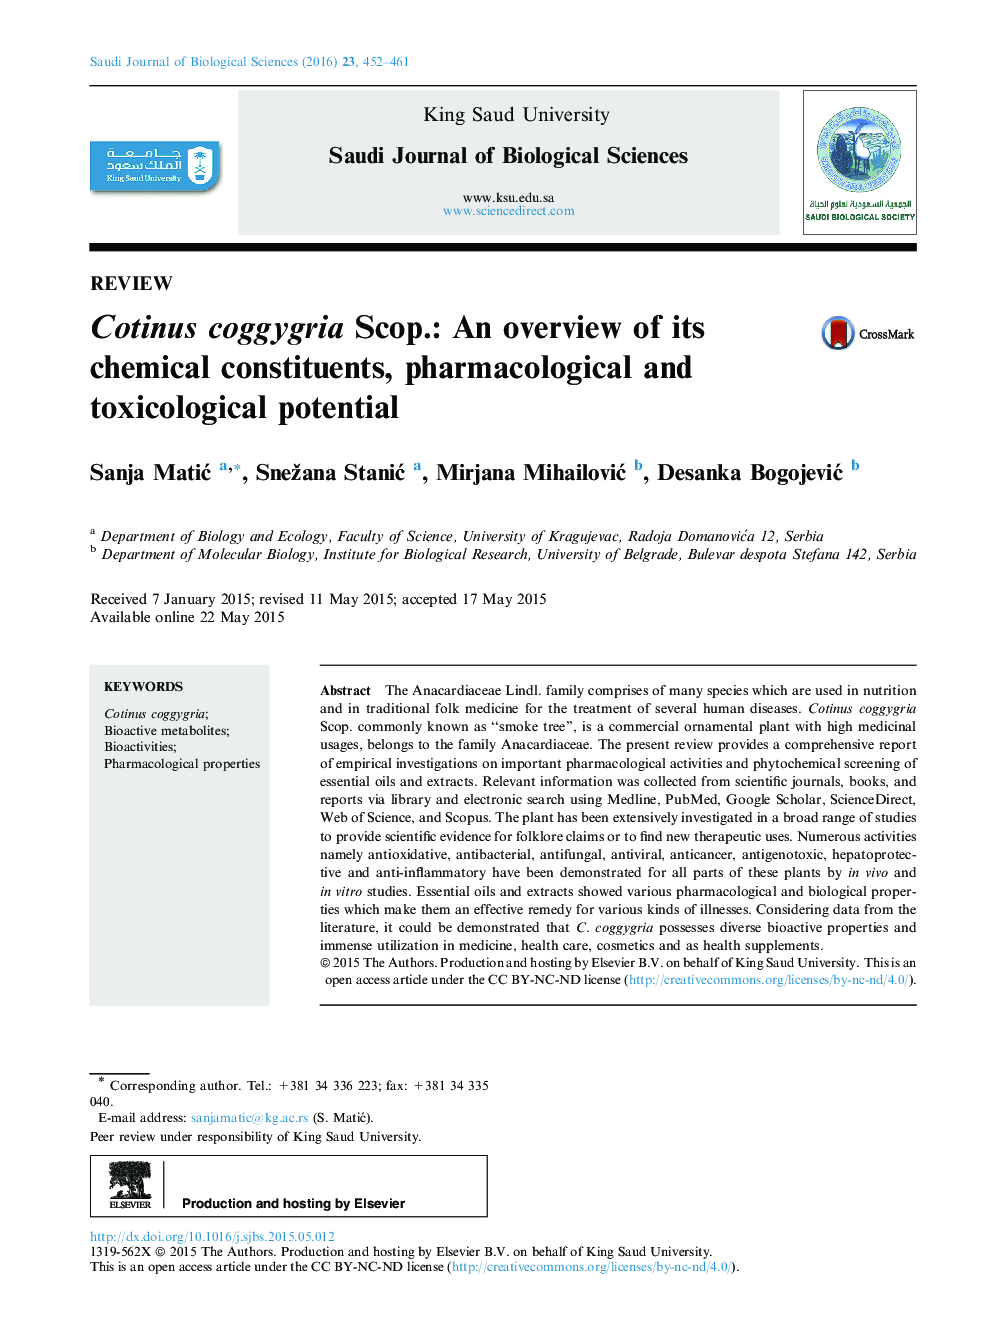 Cotinus coggygria Scop.: An overview of its chemical constituents, pharmacological and toxicological potential 